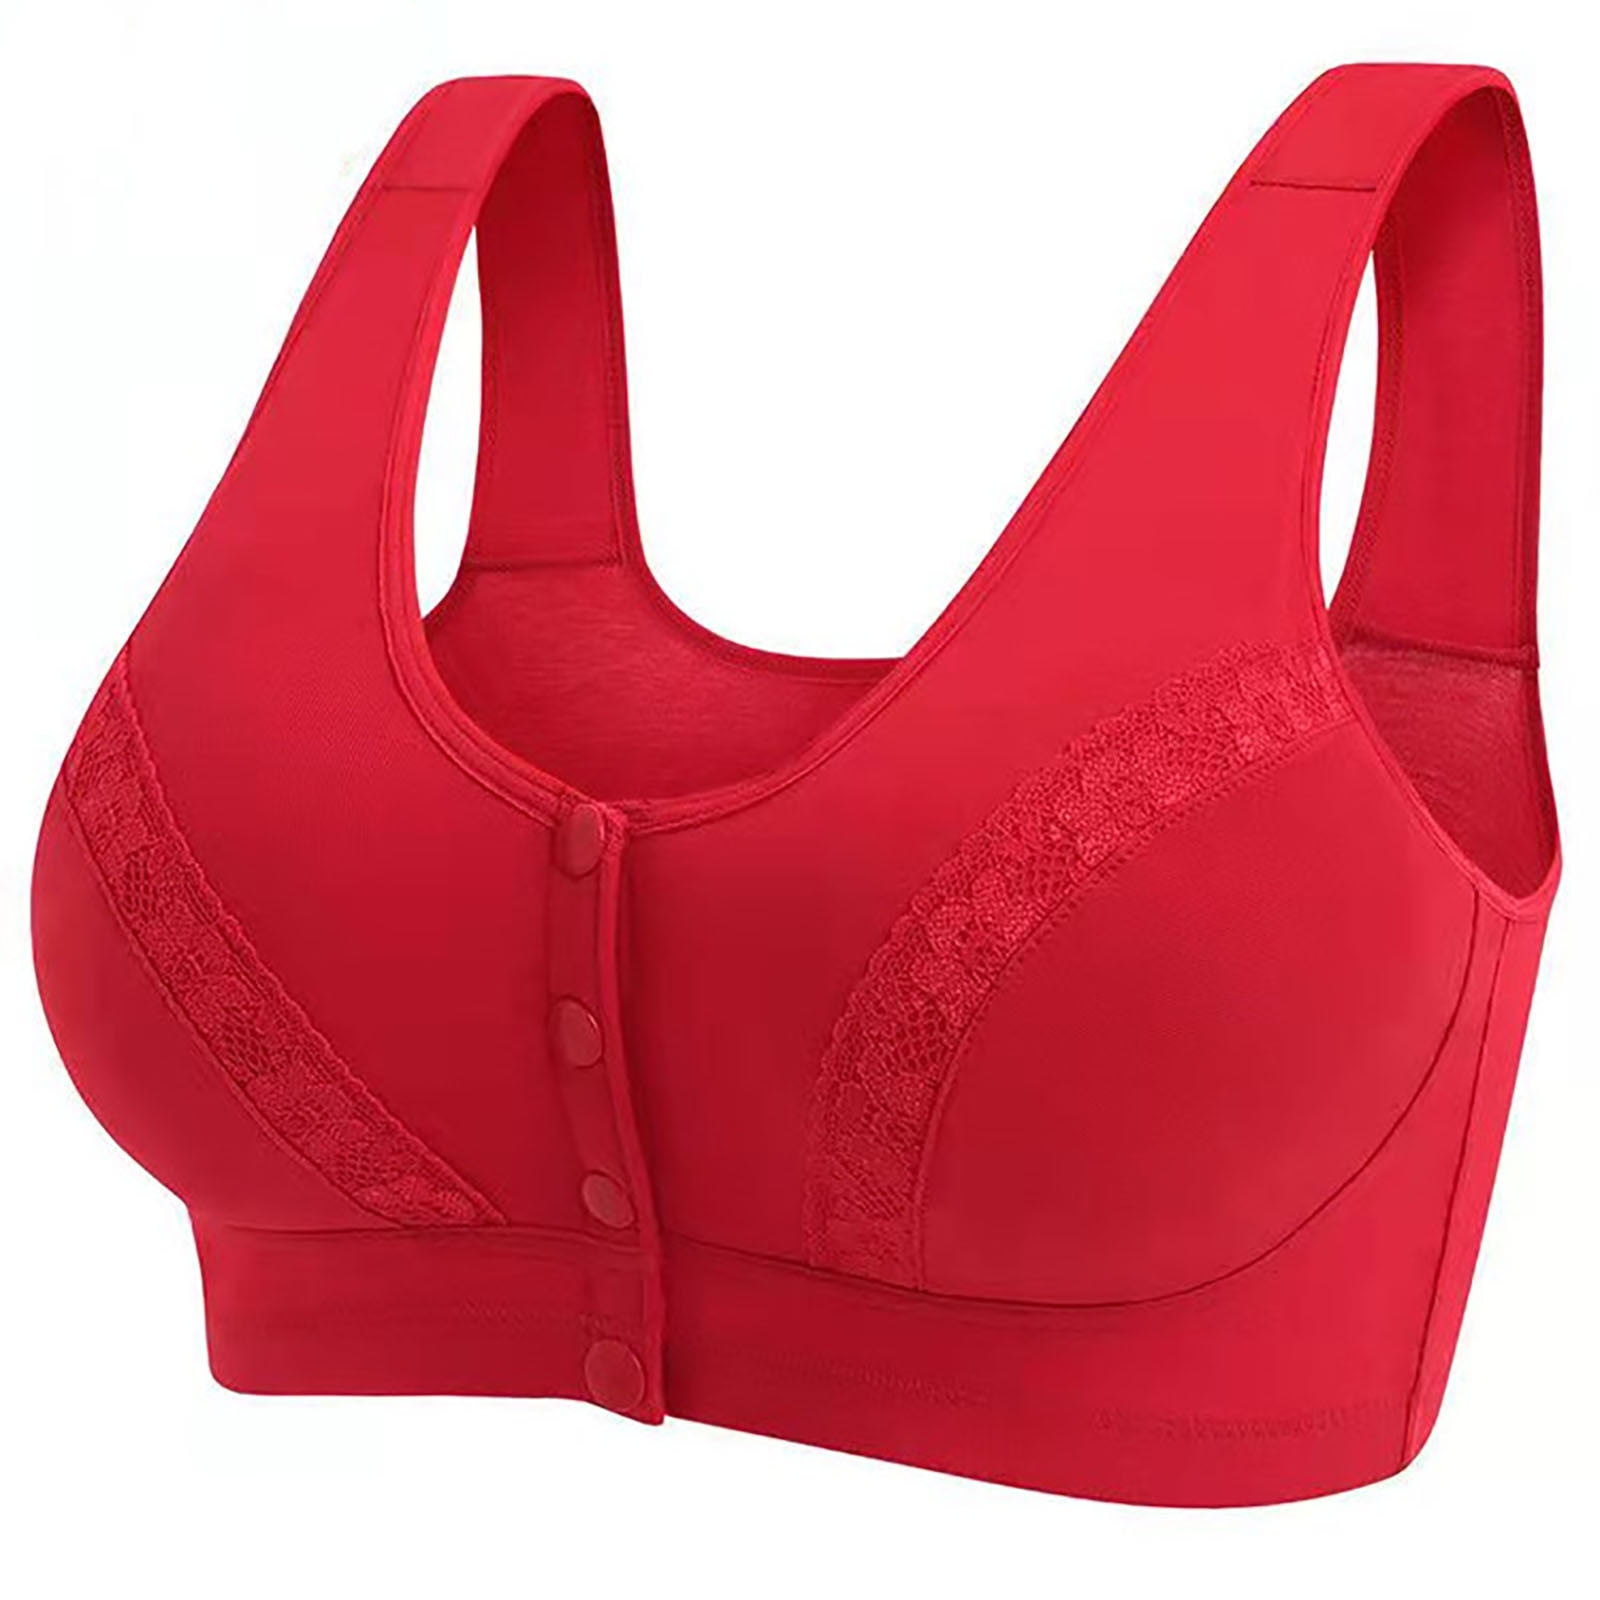 Best Very Lightly Used Bras For Sale for sale in Sarver, Pennsylvania for  2024